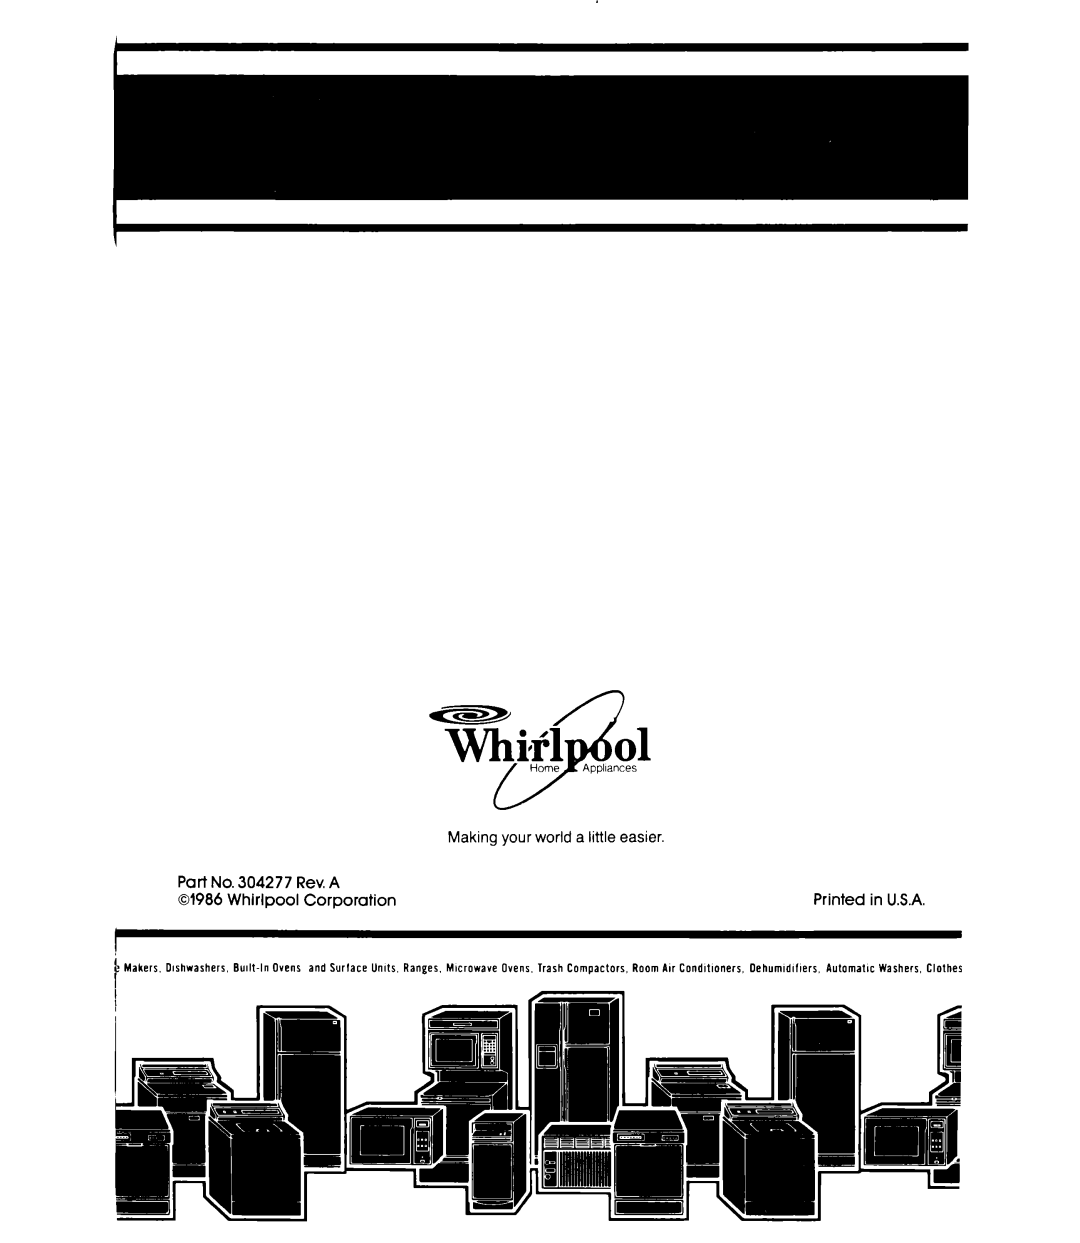 Whirlpool DUSOOXR manual Making your world a little easier, Part No. 304277 Rev. A, Whirlpool Corporation, Printed in U.S.A 